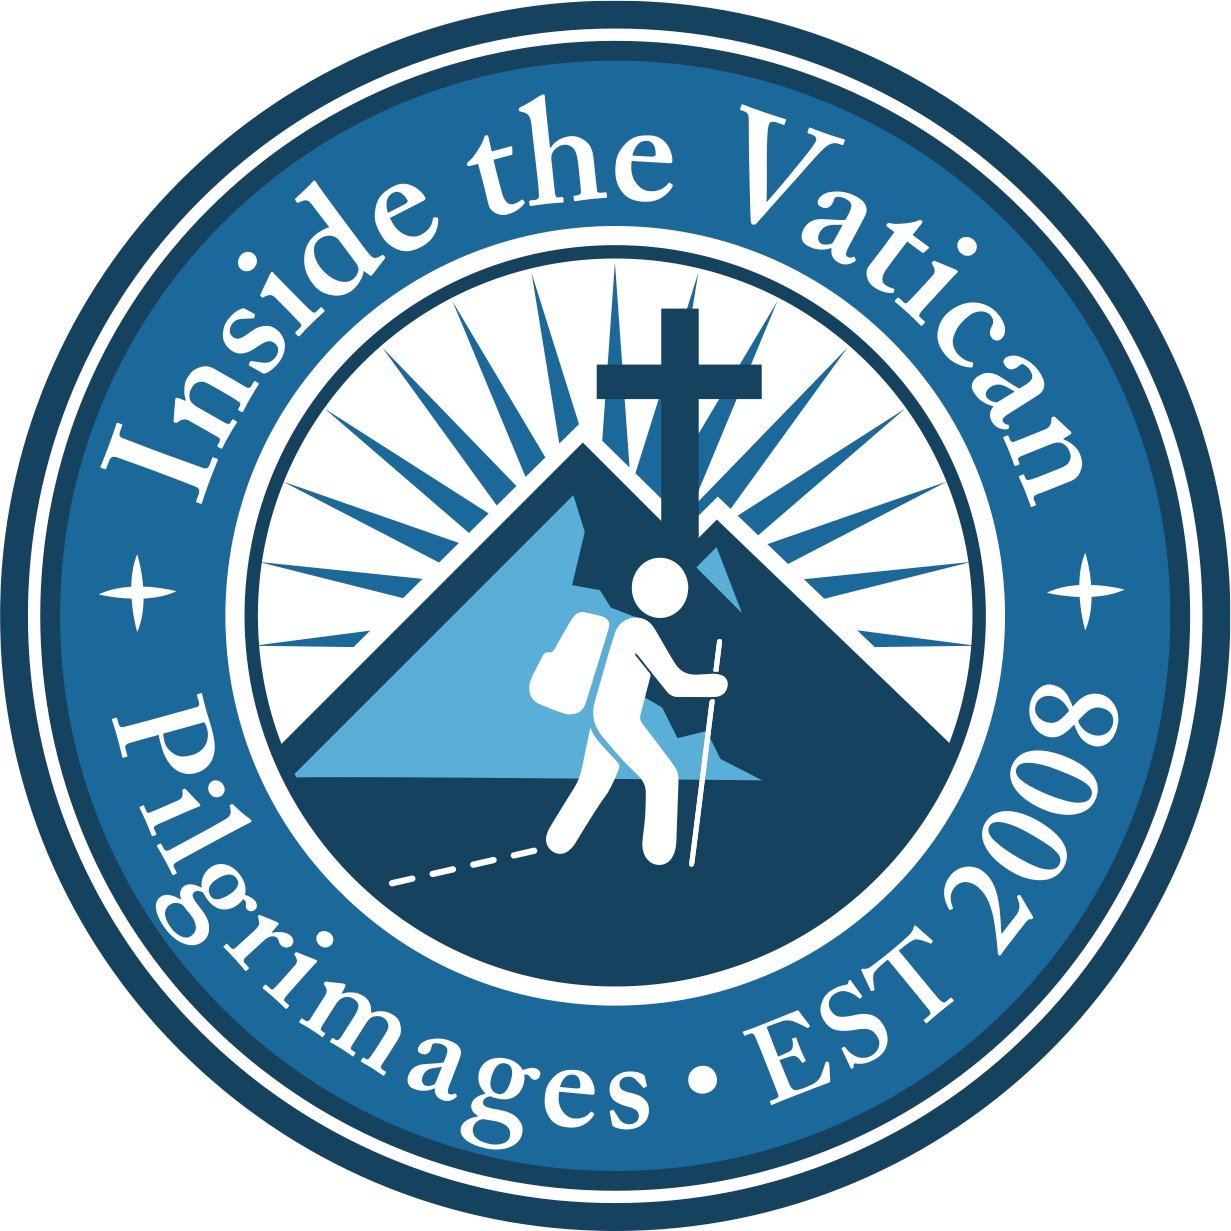 Inside the Vatican Pilgrimages provides a total immersion experience into the “heart of the Church